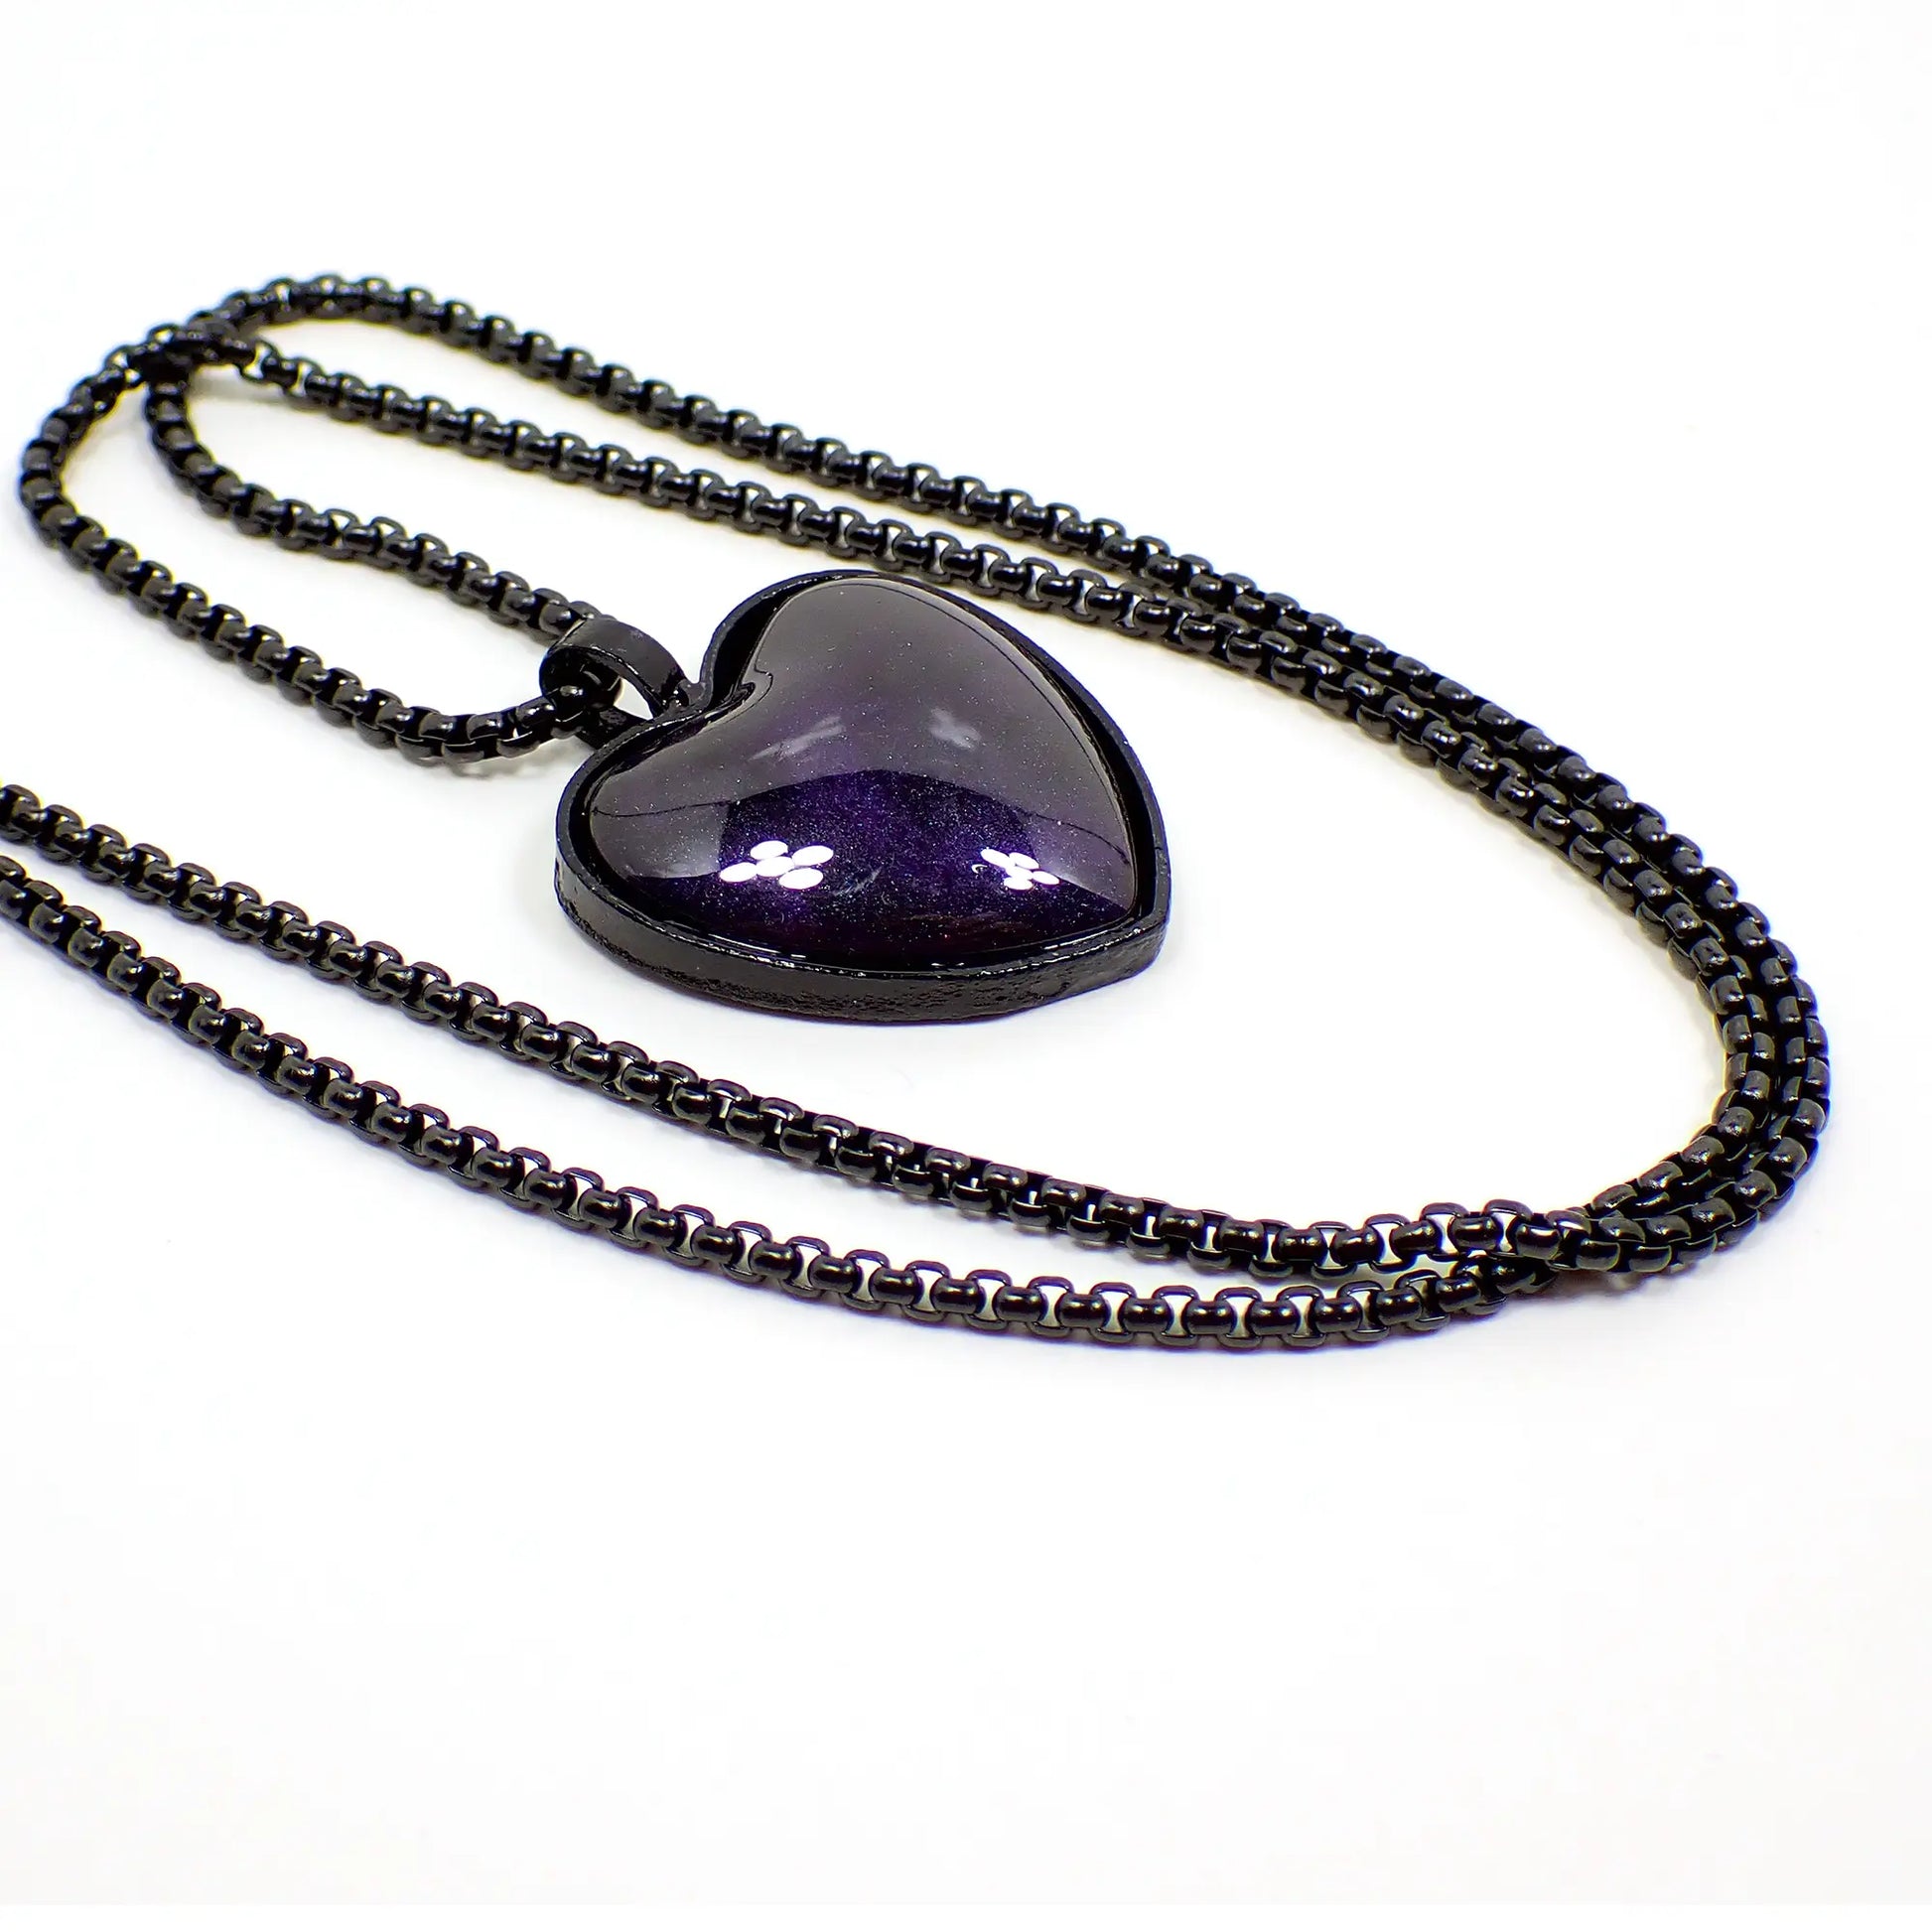 enlarged view of the Goth handmade resin heart pendant necklace. The box chain and pendant setting are black coated in color. The pendant is shaped like a heart with pearly black resin that has dark pearly blue with hints of purple mixed in.